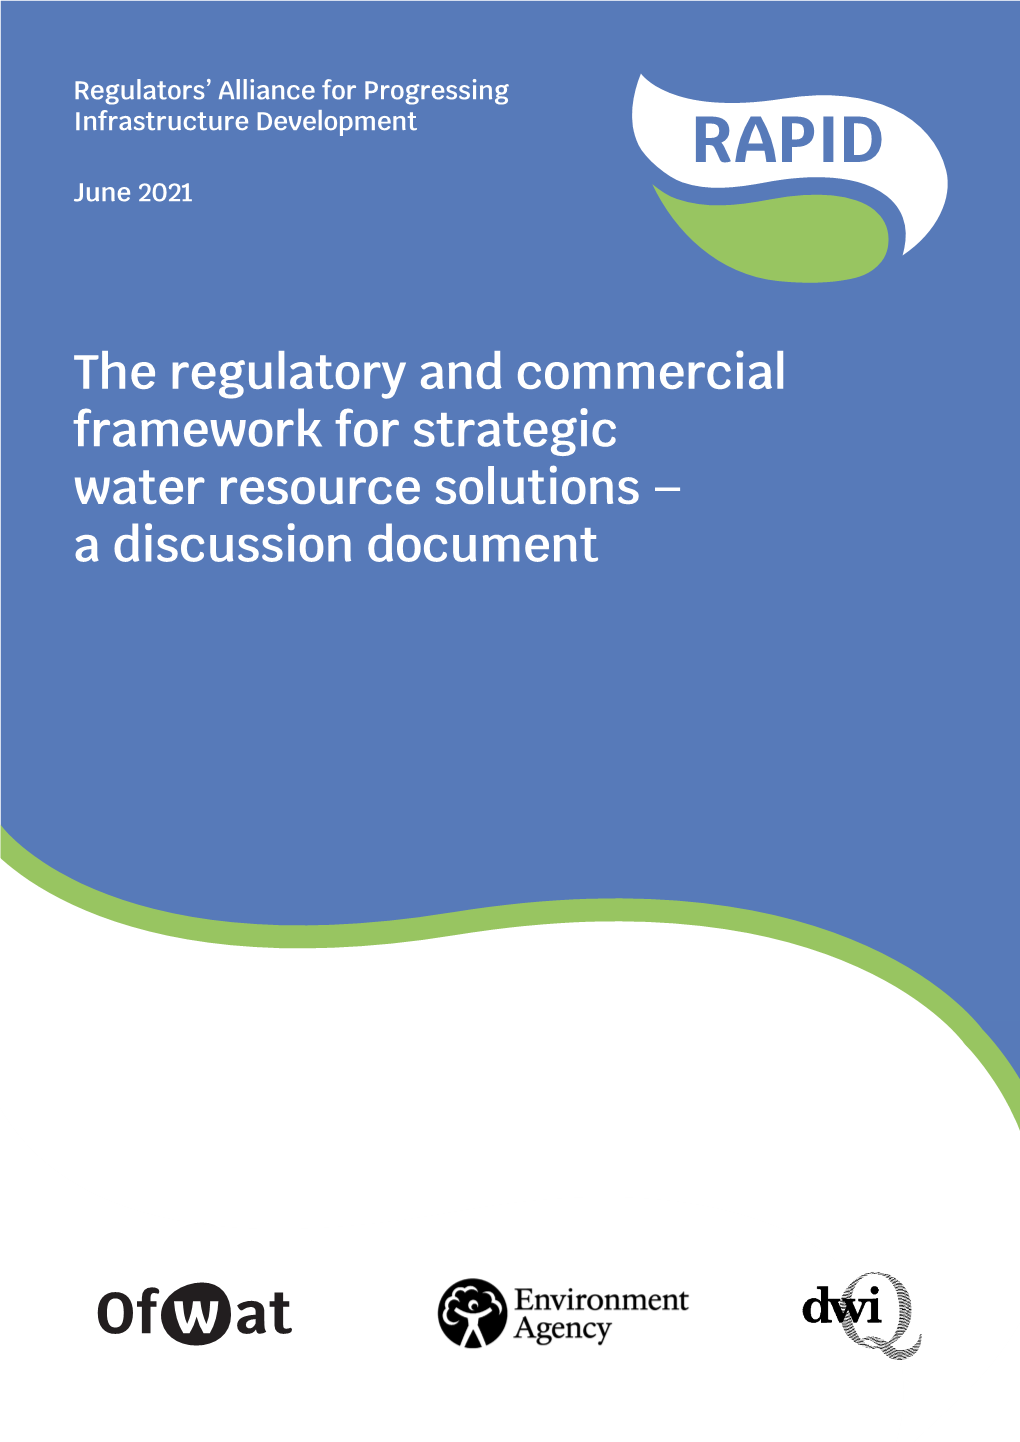 The Regulatory and Commercial Framework for Strategic Water Resource Solutions – a Discussion Document RAPID Regulatory and Commercial Framework Discussion Document